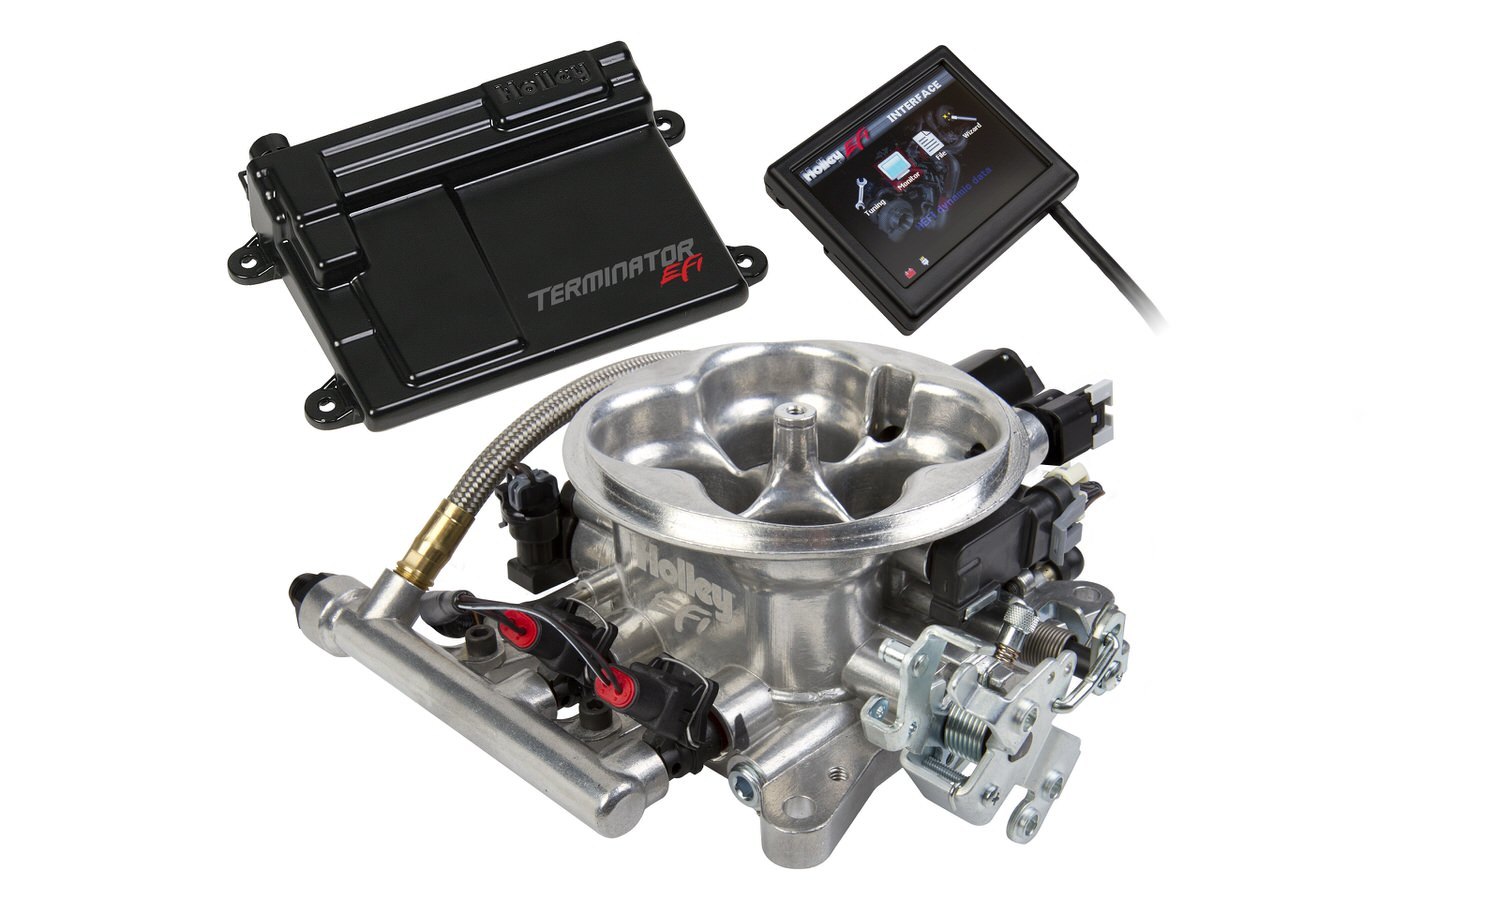 HOLLEY Fuel Injection, Terminator EFI, Throttle Body, Square Bore, 80 lb/hr Injectors, 950 CFM, Aluminum, Polished, G